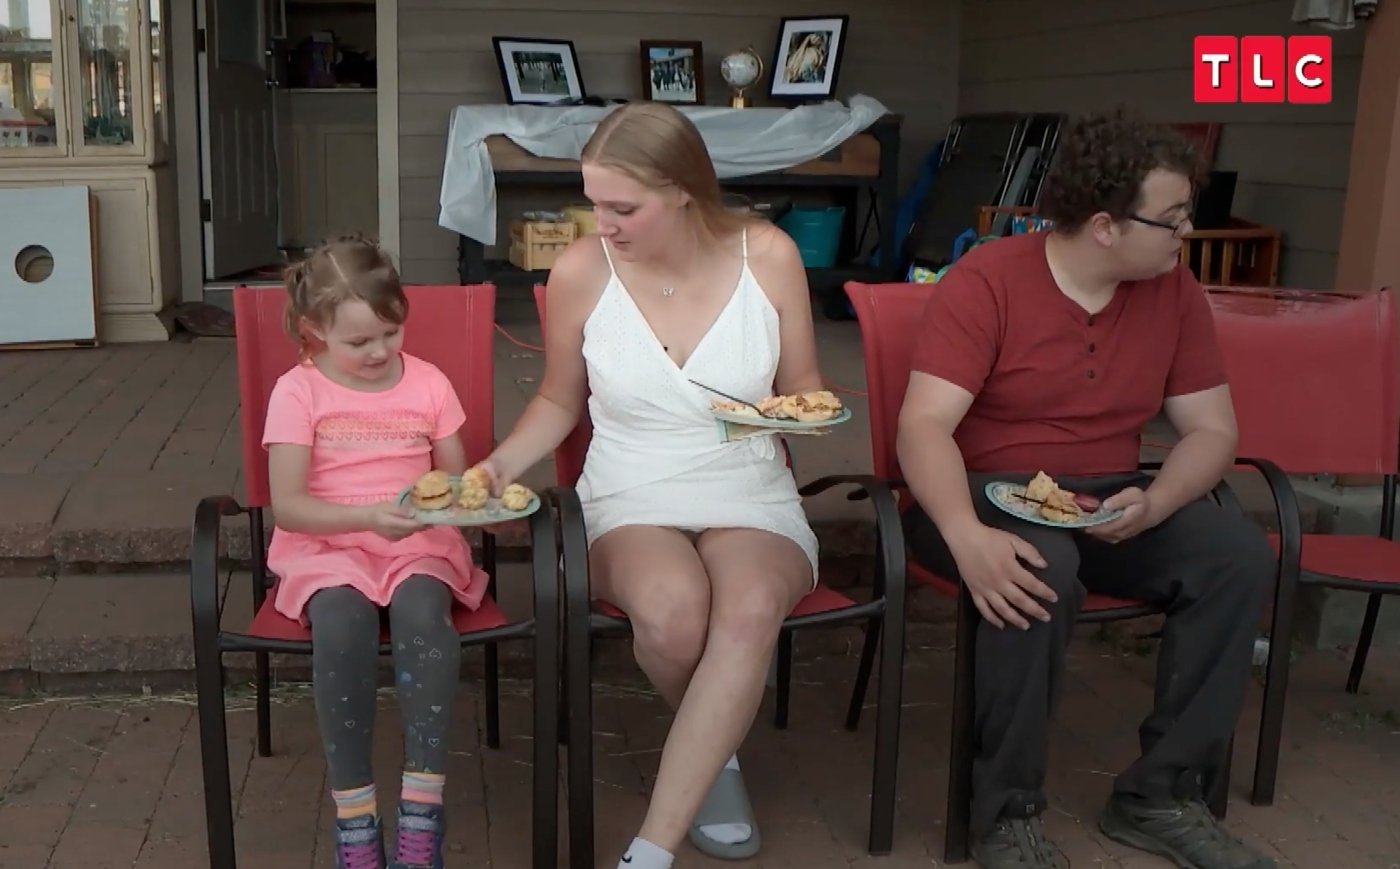 Ariella Brown, Ysabel Brown, and Dayton Brown sit together and eat during Ysabel's graduation party on 'Sister Wives' Season 17 on TLC.